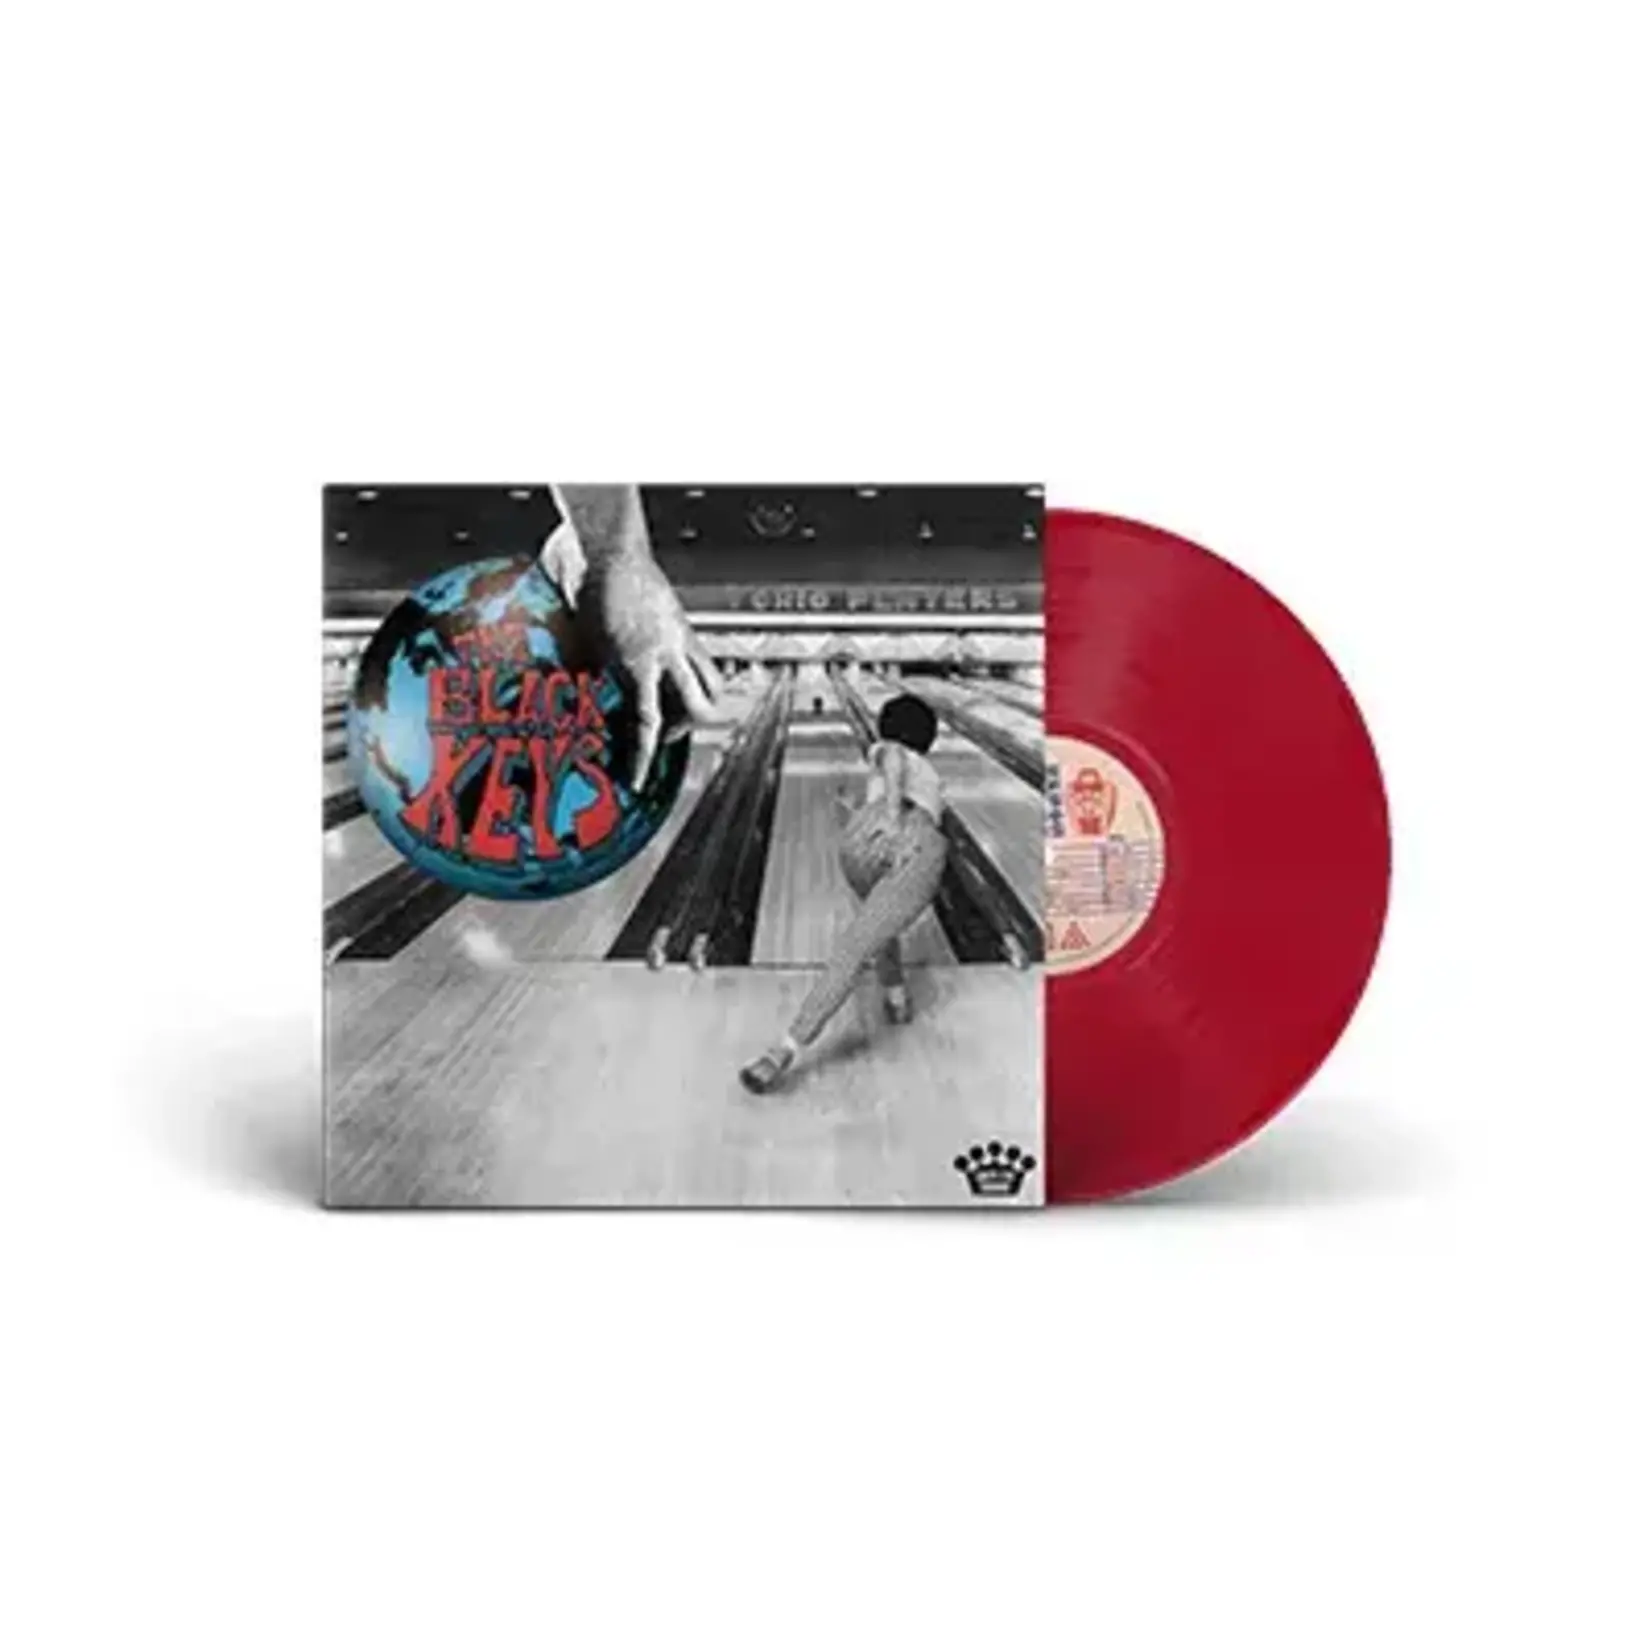 [New] Black Keys: Ohio Players (clear red vinyl-indie exclusive) [NONESUCH]